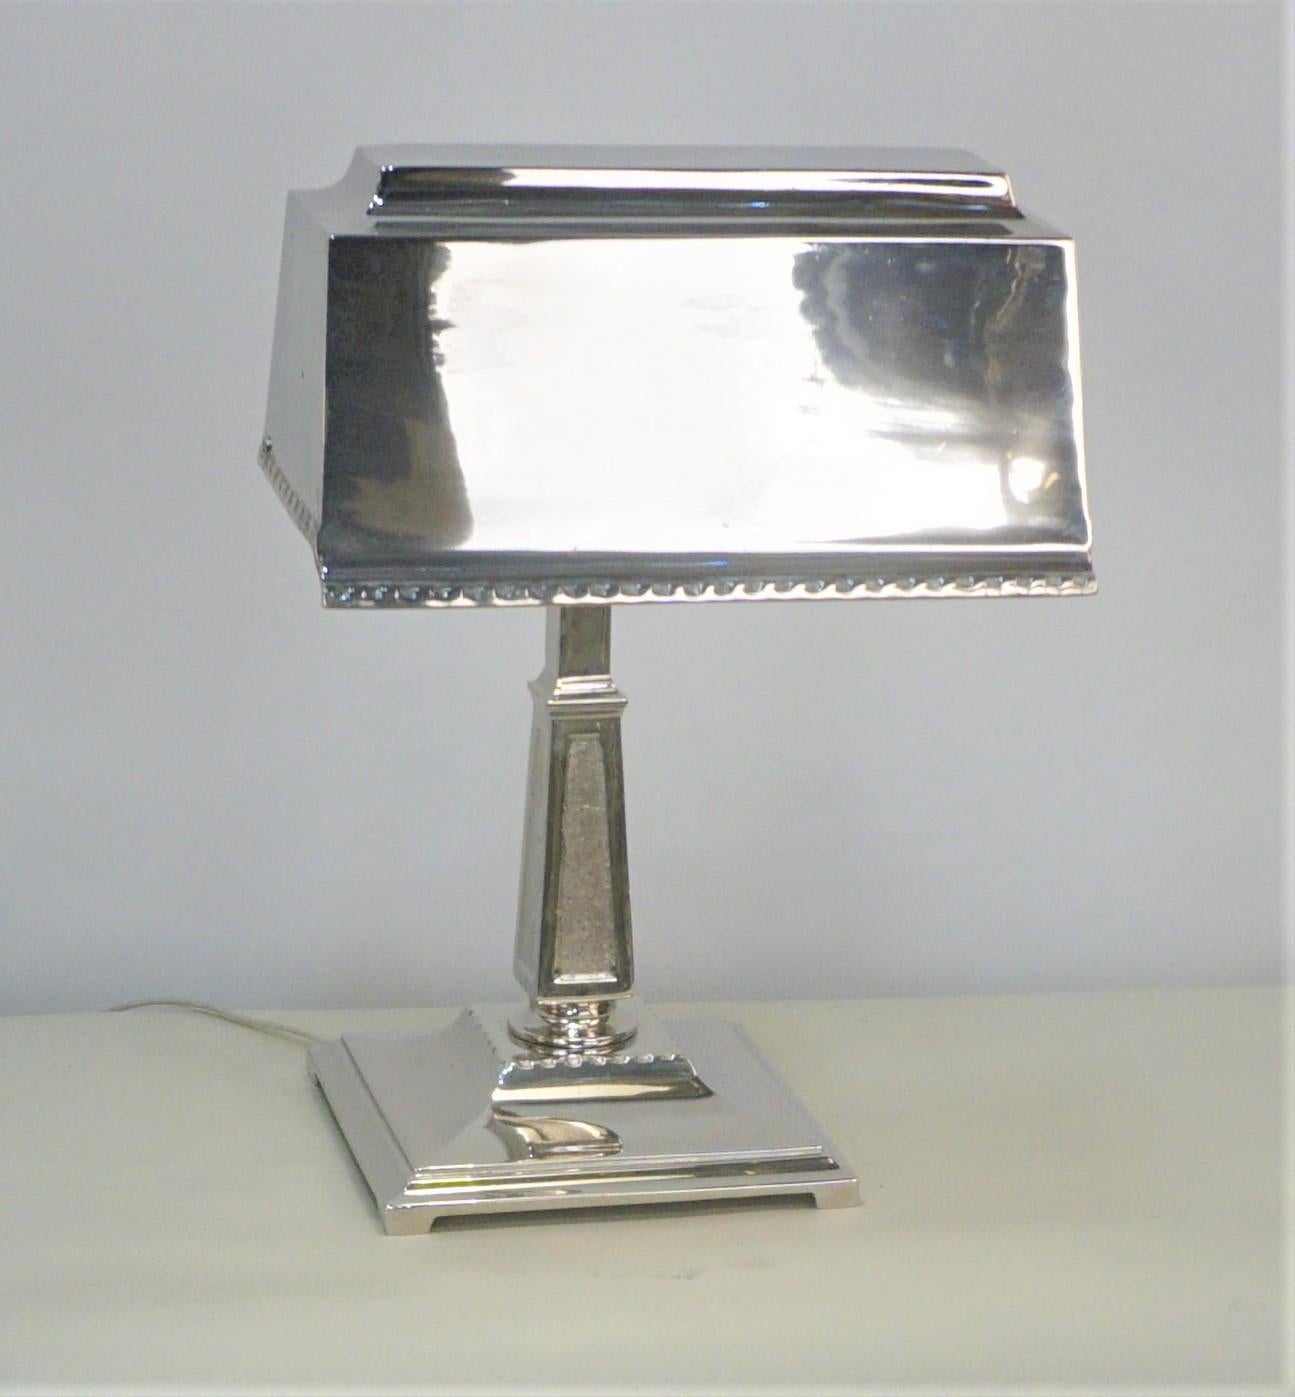 Beautiful high-quality polished nickel on cast bronze desk lamp with under the shade magnifying glass lens.
 This polished nickel with no oxidation, black spots are reflections not oxidation.